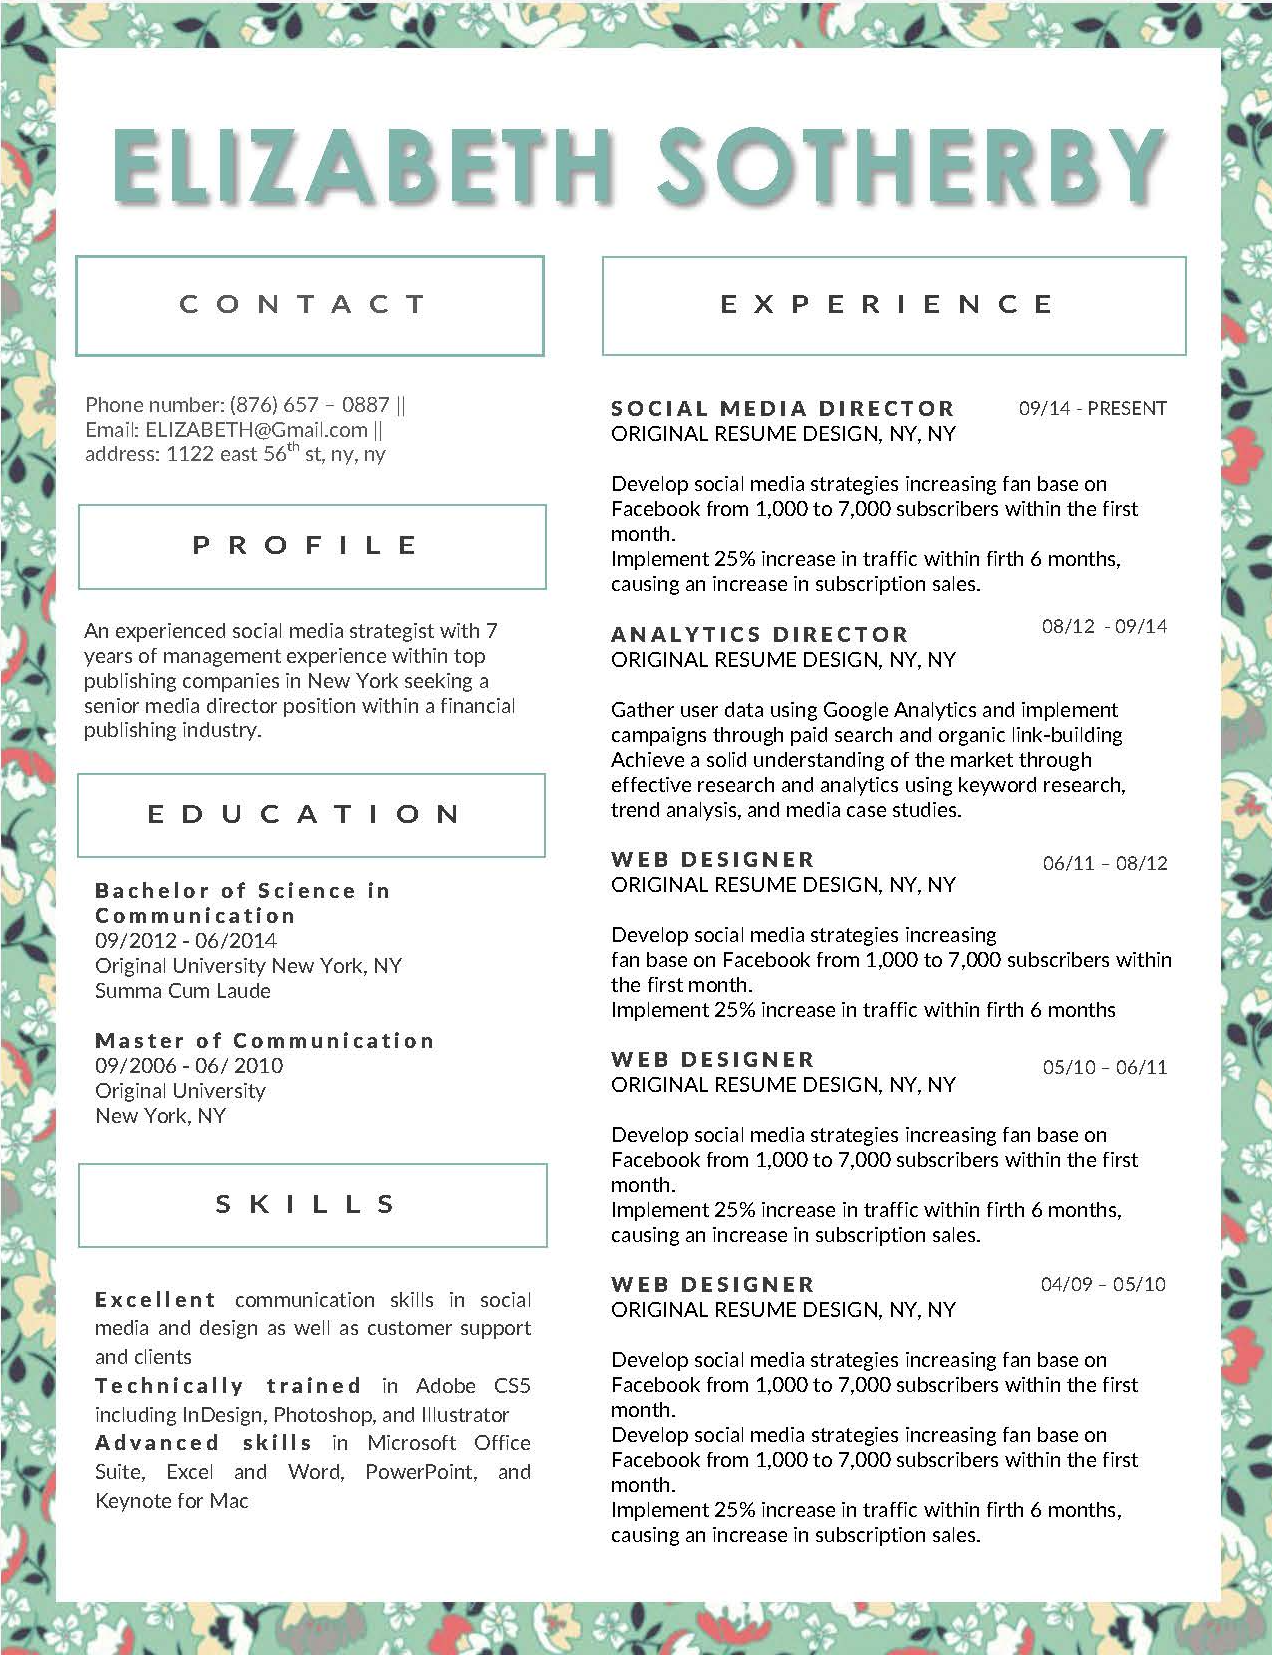 Downloadable Resume + Cover Template and Cover Letter Template for Microsoft Word and Apple Pages. This cover letter template is perfect for anyone in the fashion field. The template’s design is a modern, unique, colorful, and professional. WE SWEAT THE DETAILS, SO YOU DON’T HAVE TO Stand Out Shop resume templates for Microsoft Word and Apple Pages will help you design a modern and professional resume in minutes! Simply download, open in Microsoft Word or Apple Pages, and input your resume’s information. Increase your chances of landing your dream job with a job winning, modern, simple, and scannable resume template for Microsoft Word and Apple Pages. Creating a resume shouldn’t suck Simply download a resume template from Stand Out Shop, enter your information in Microsoft Word or Apple Pages and get a beautifully formatted resume in seconds. Create a unique and vivid resume in minutes. Make an impressive resume. Customize your own layout in Microsoft Word or Apple Pages and introduce yourself in an impressive way. You can download your resume at any time. Stand out from other job seekers with a beautiful professional design.